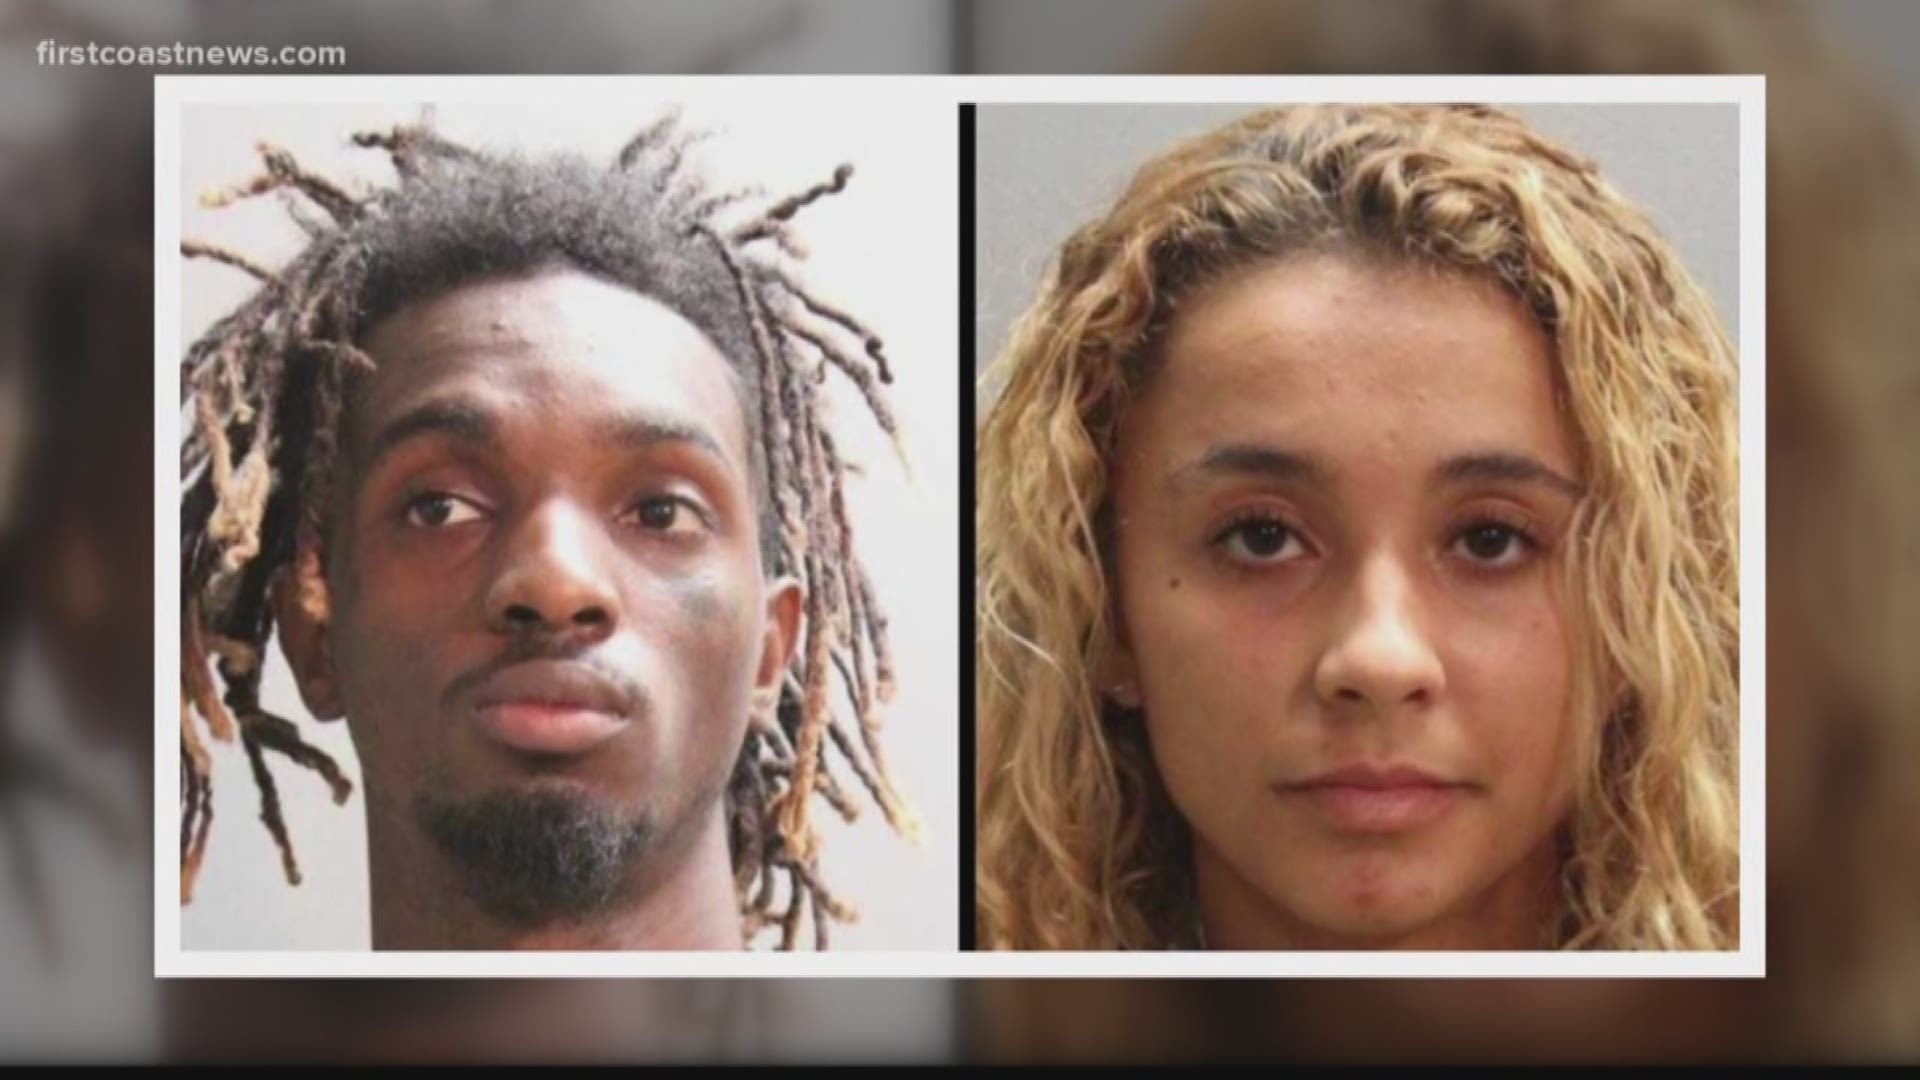 Trinity Tavarez-Soto, 19, and Mark Gray, 20, were arrested and charged with animal cruelty.